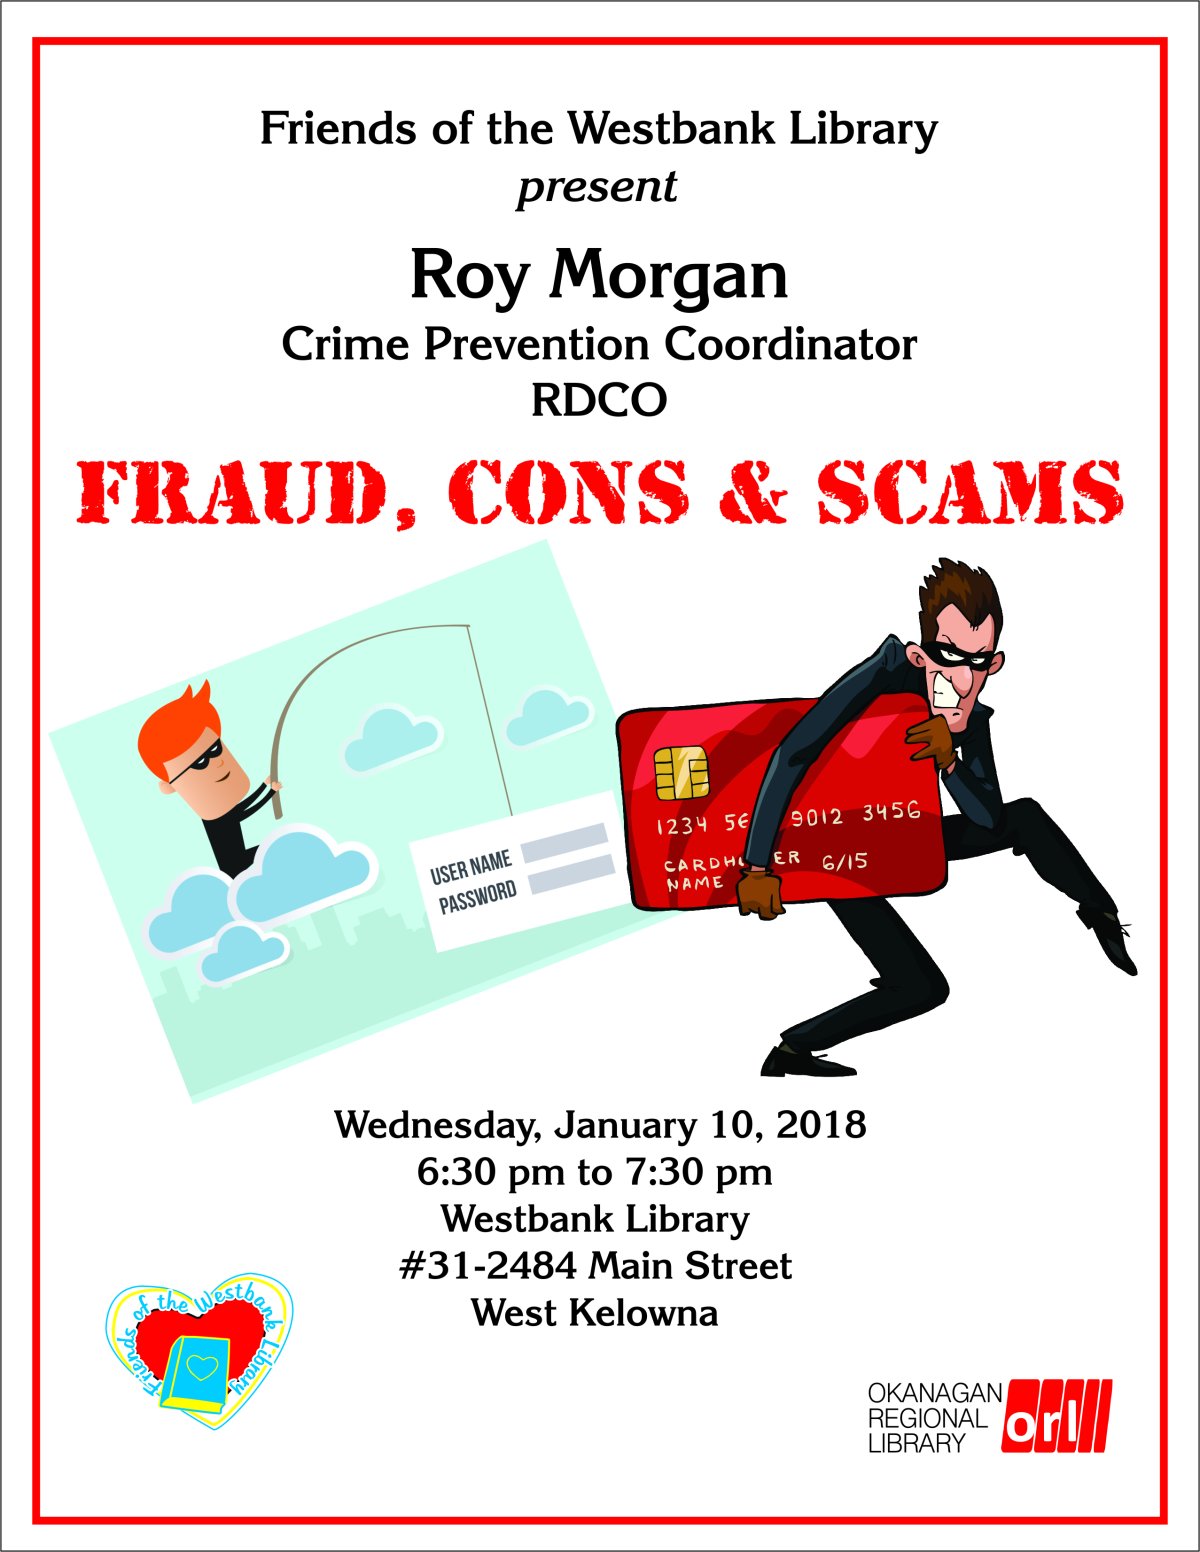 Fraud, Cons & Scams - image